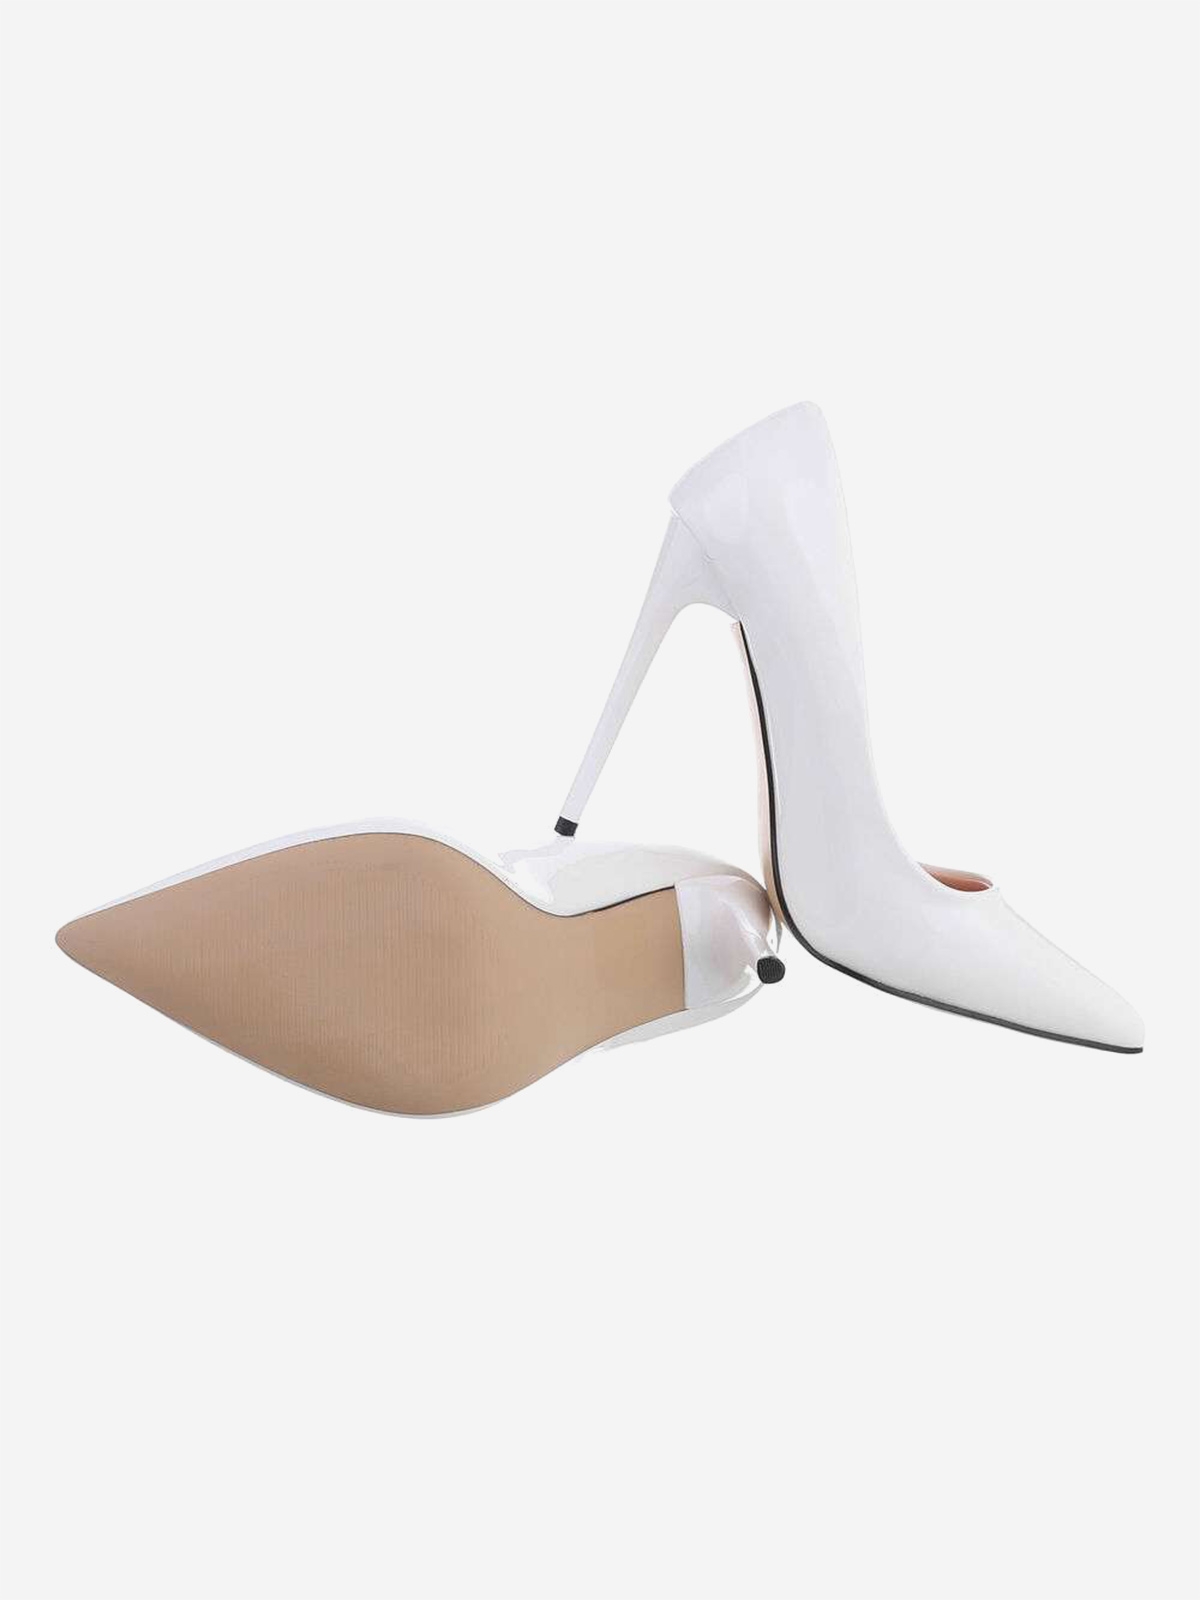 Women's high-heeled shoes in white